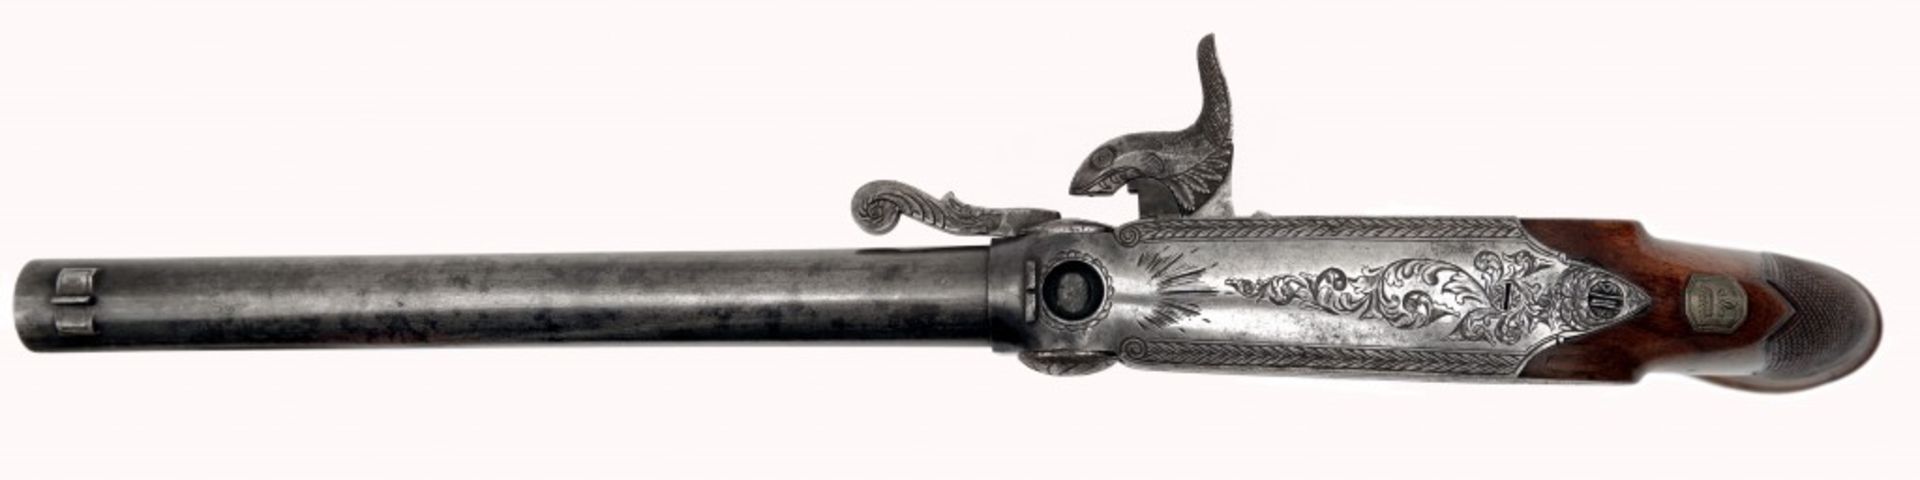 A Sidehammer Pistols with Pellet Primer System by Carl Daniel Tanner in Hannover   - Image 7 of 8